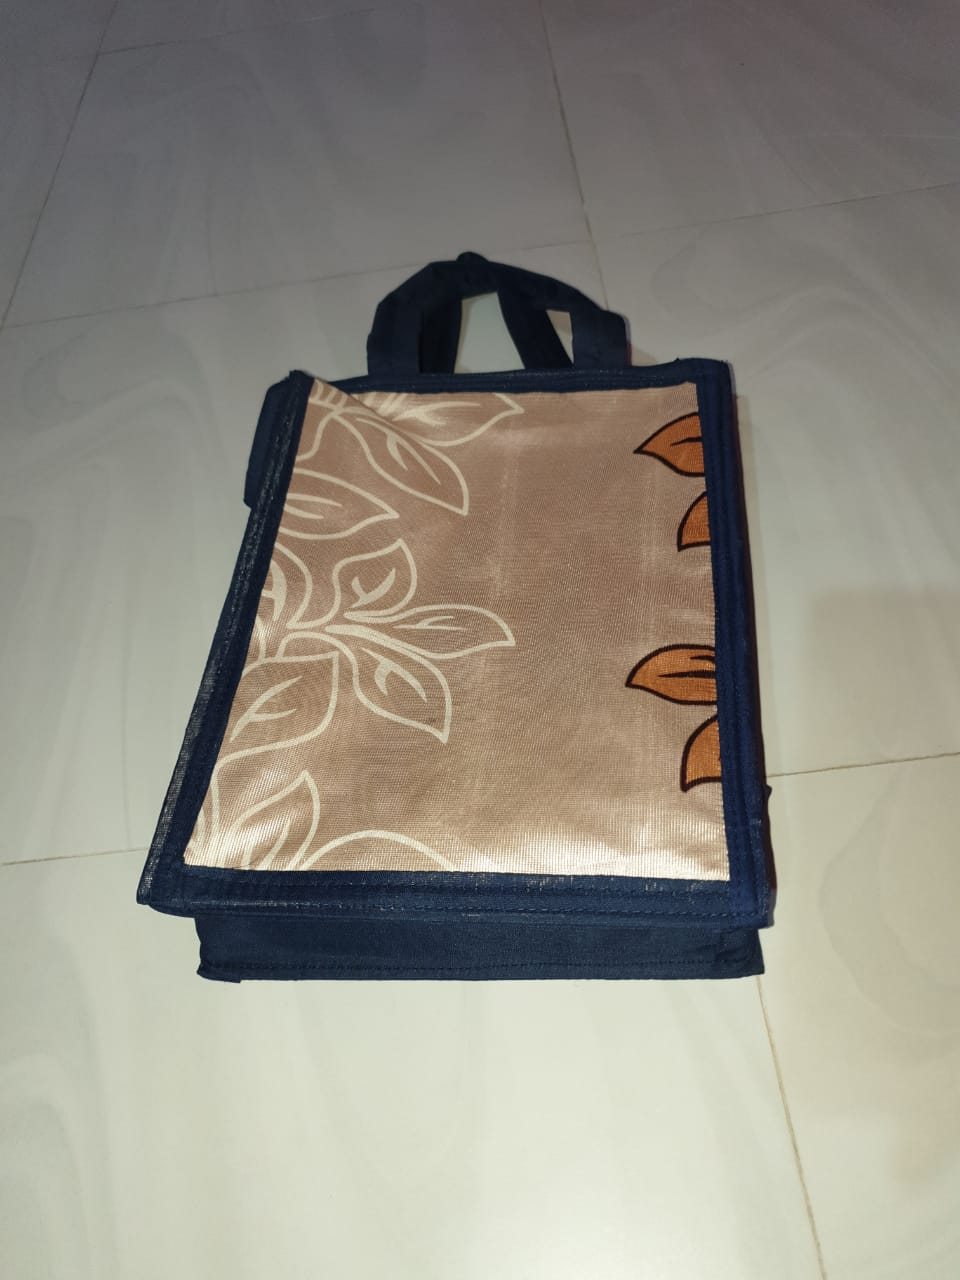 Utshob Boutique - Ladies Hand Bag Size : 8-8-4.5 inch Code: 162 Price: 290  tk Made In China For Order Please call us : 01712889954 or Inbox us |  Facebook